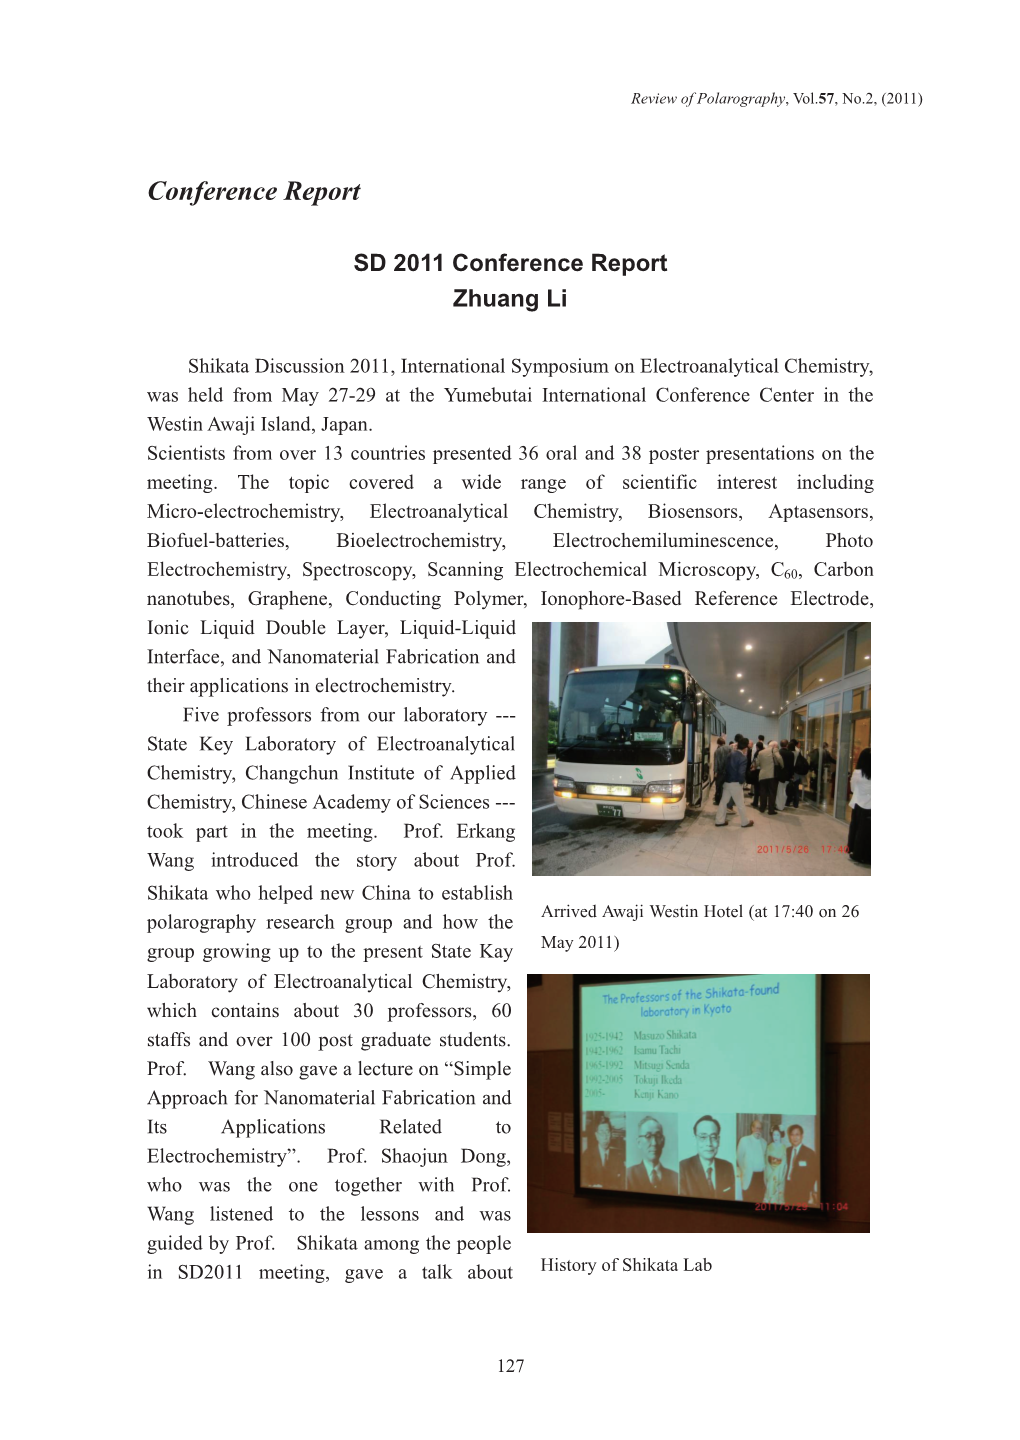 SD2011 Conference Report